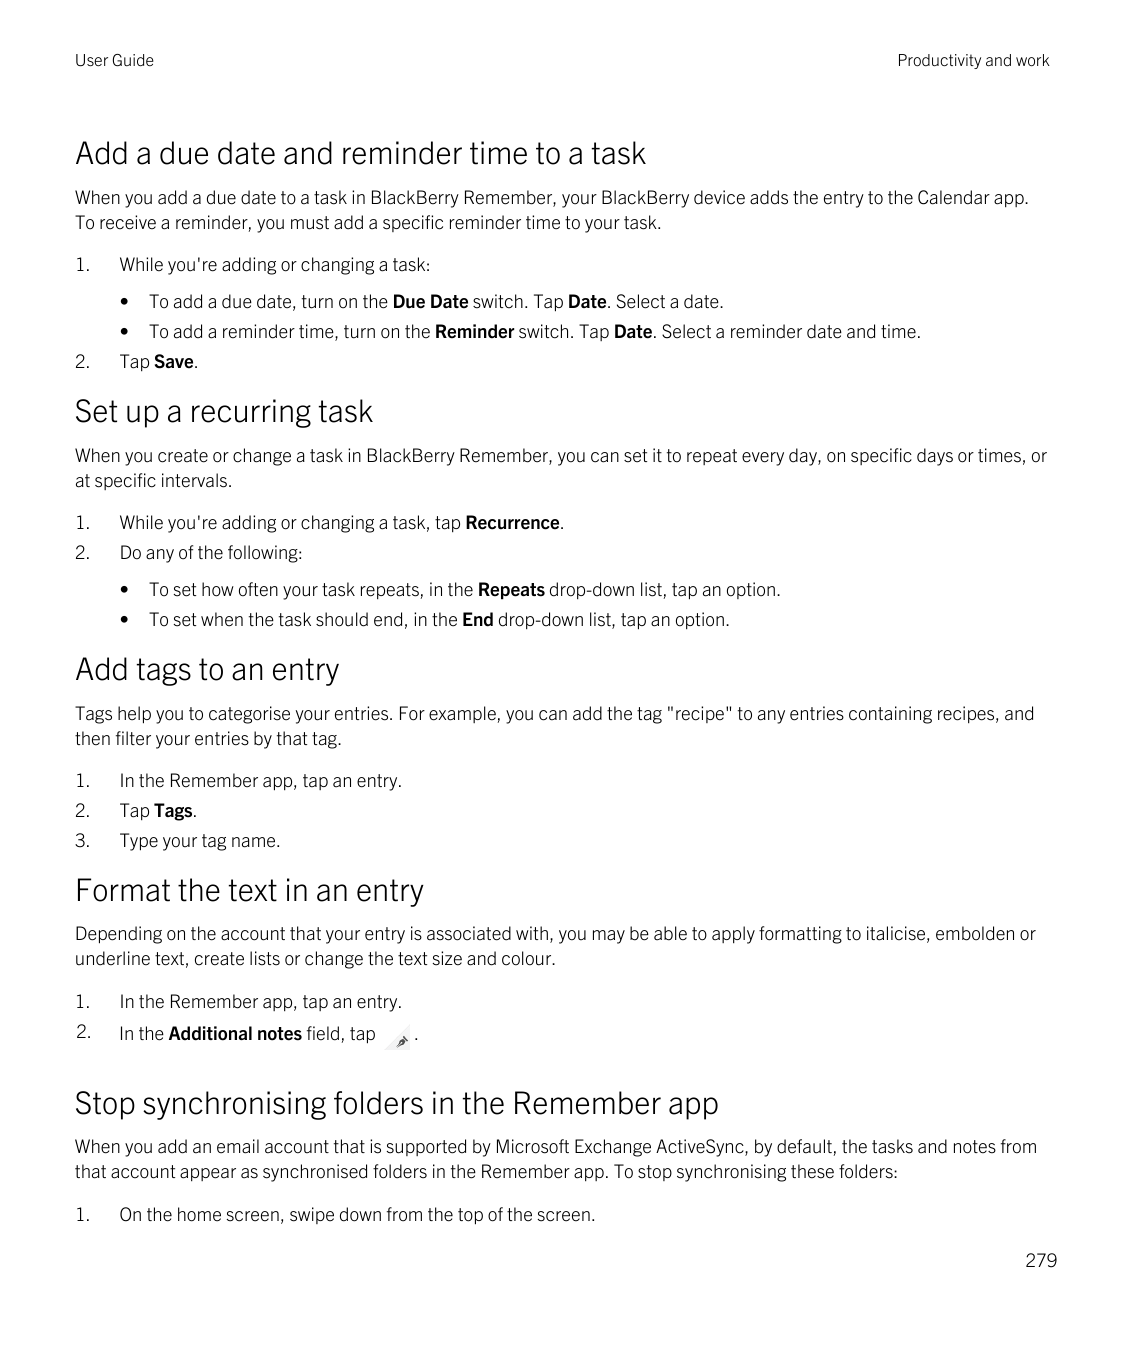 User GuideProductivity and workAdd a due date and reminder time to a taskWhen you add a due date to a task in BlackBerry Remembe